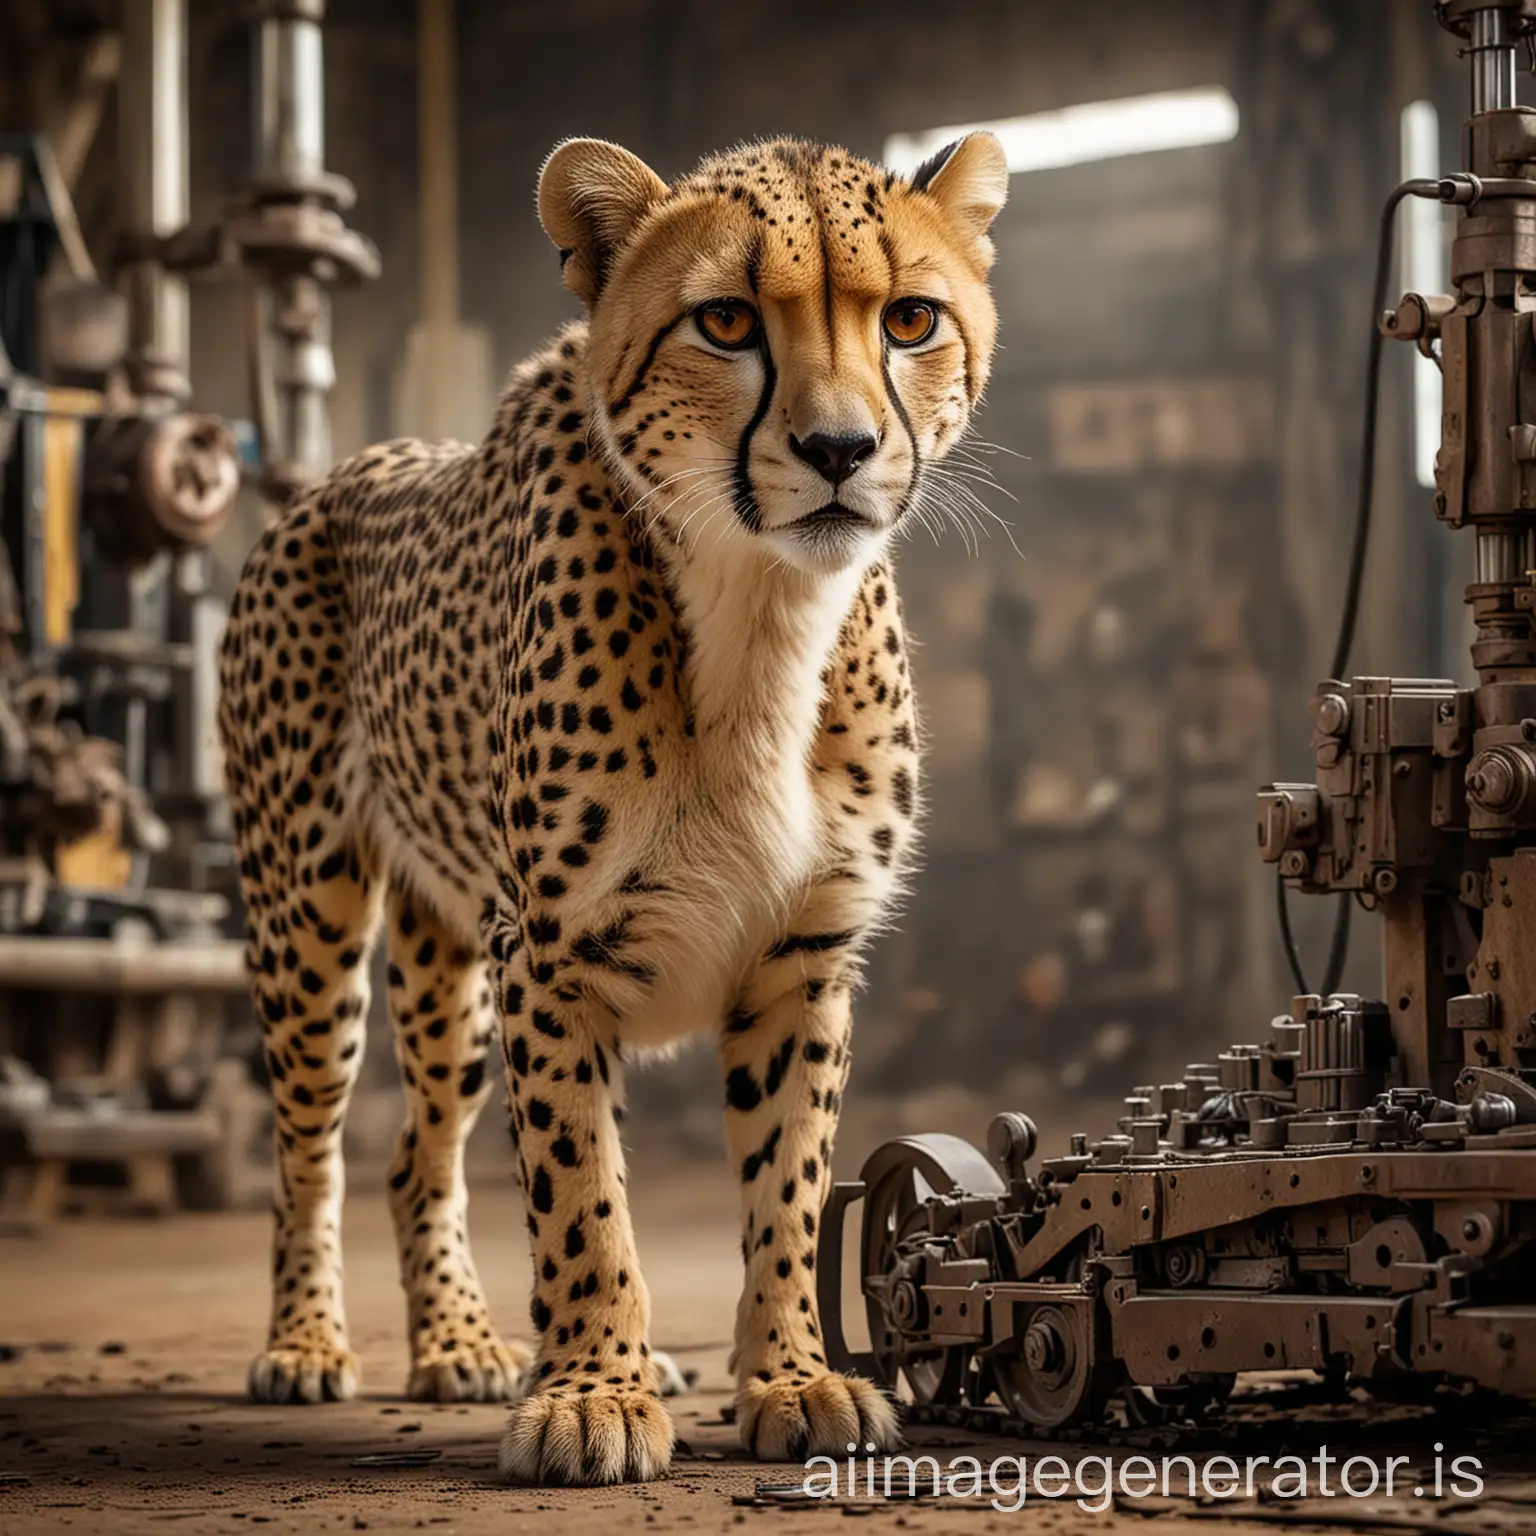 A Strong And Small Cheetah who operates the engineering machines